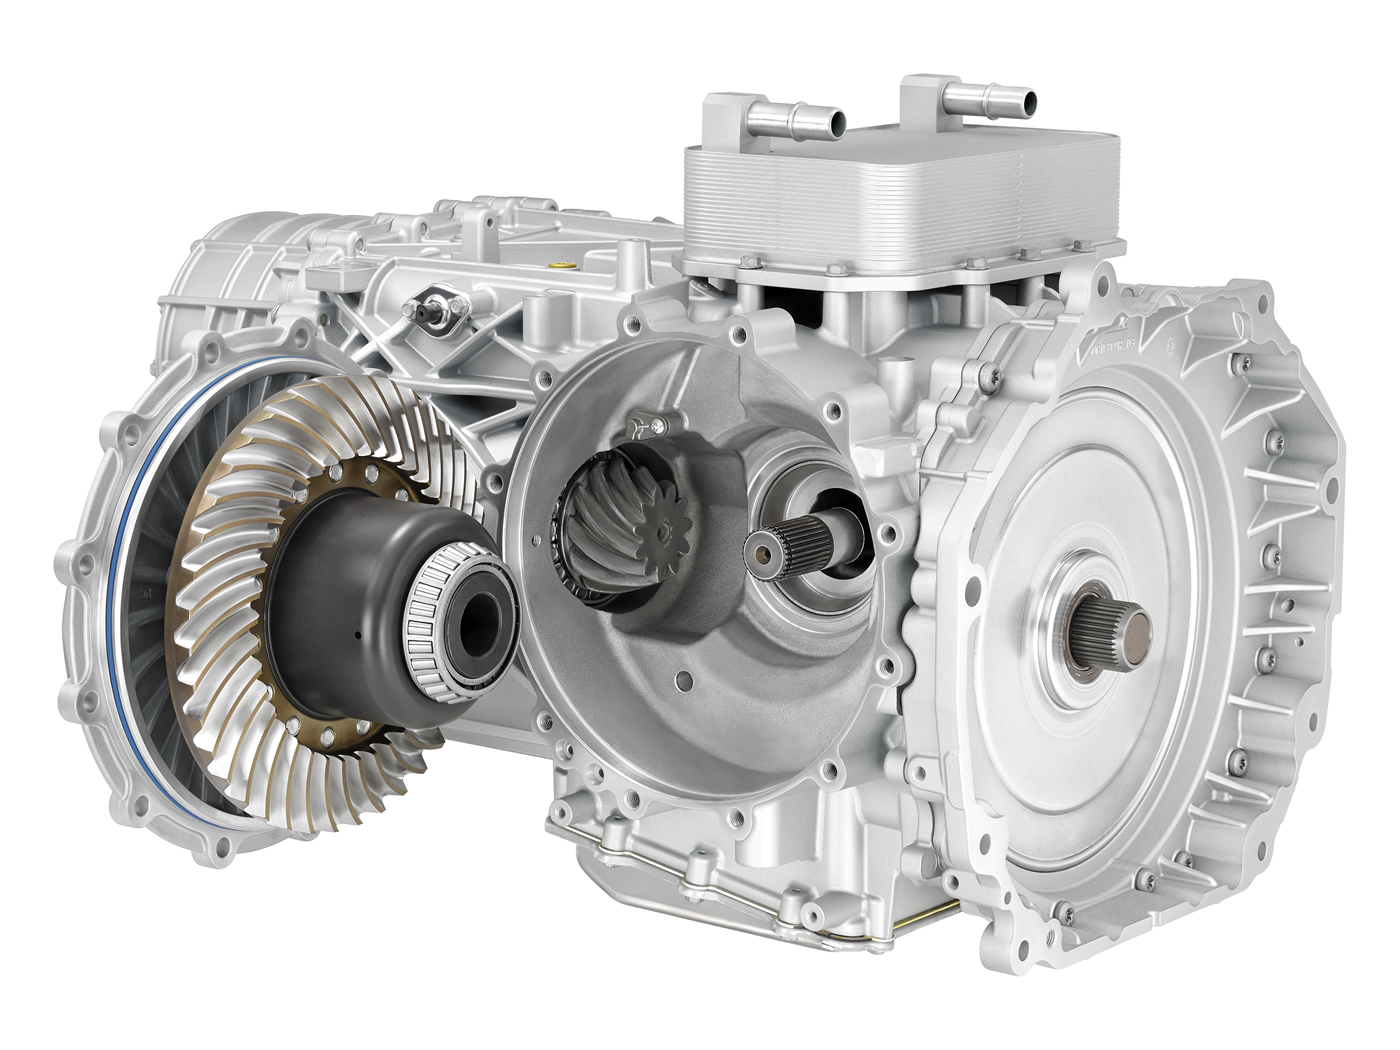 Corvette's first eight speed dual-clutch transmission.